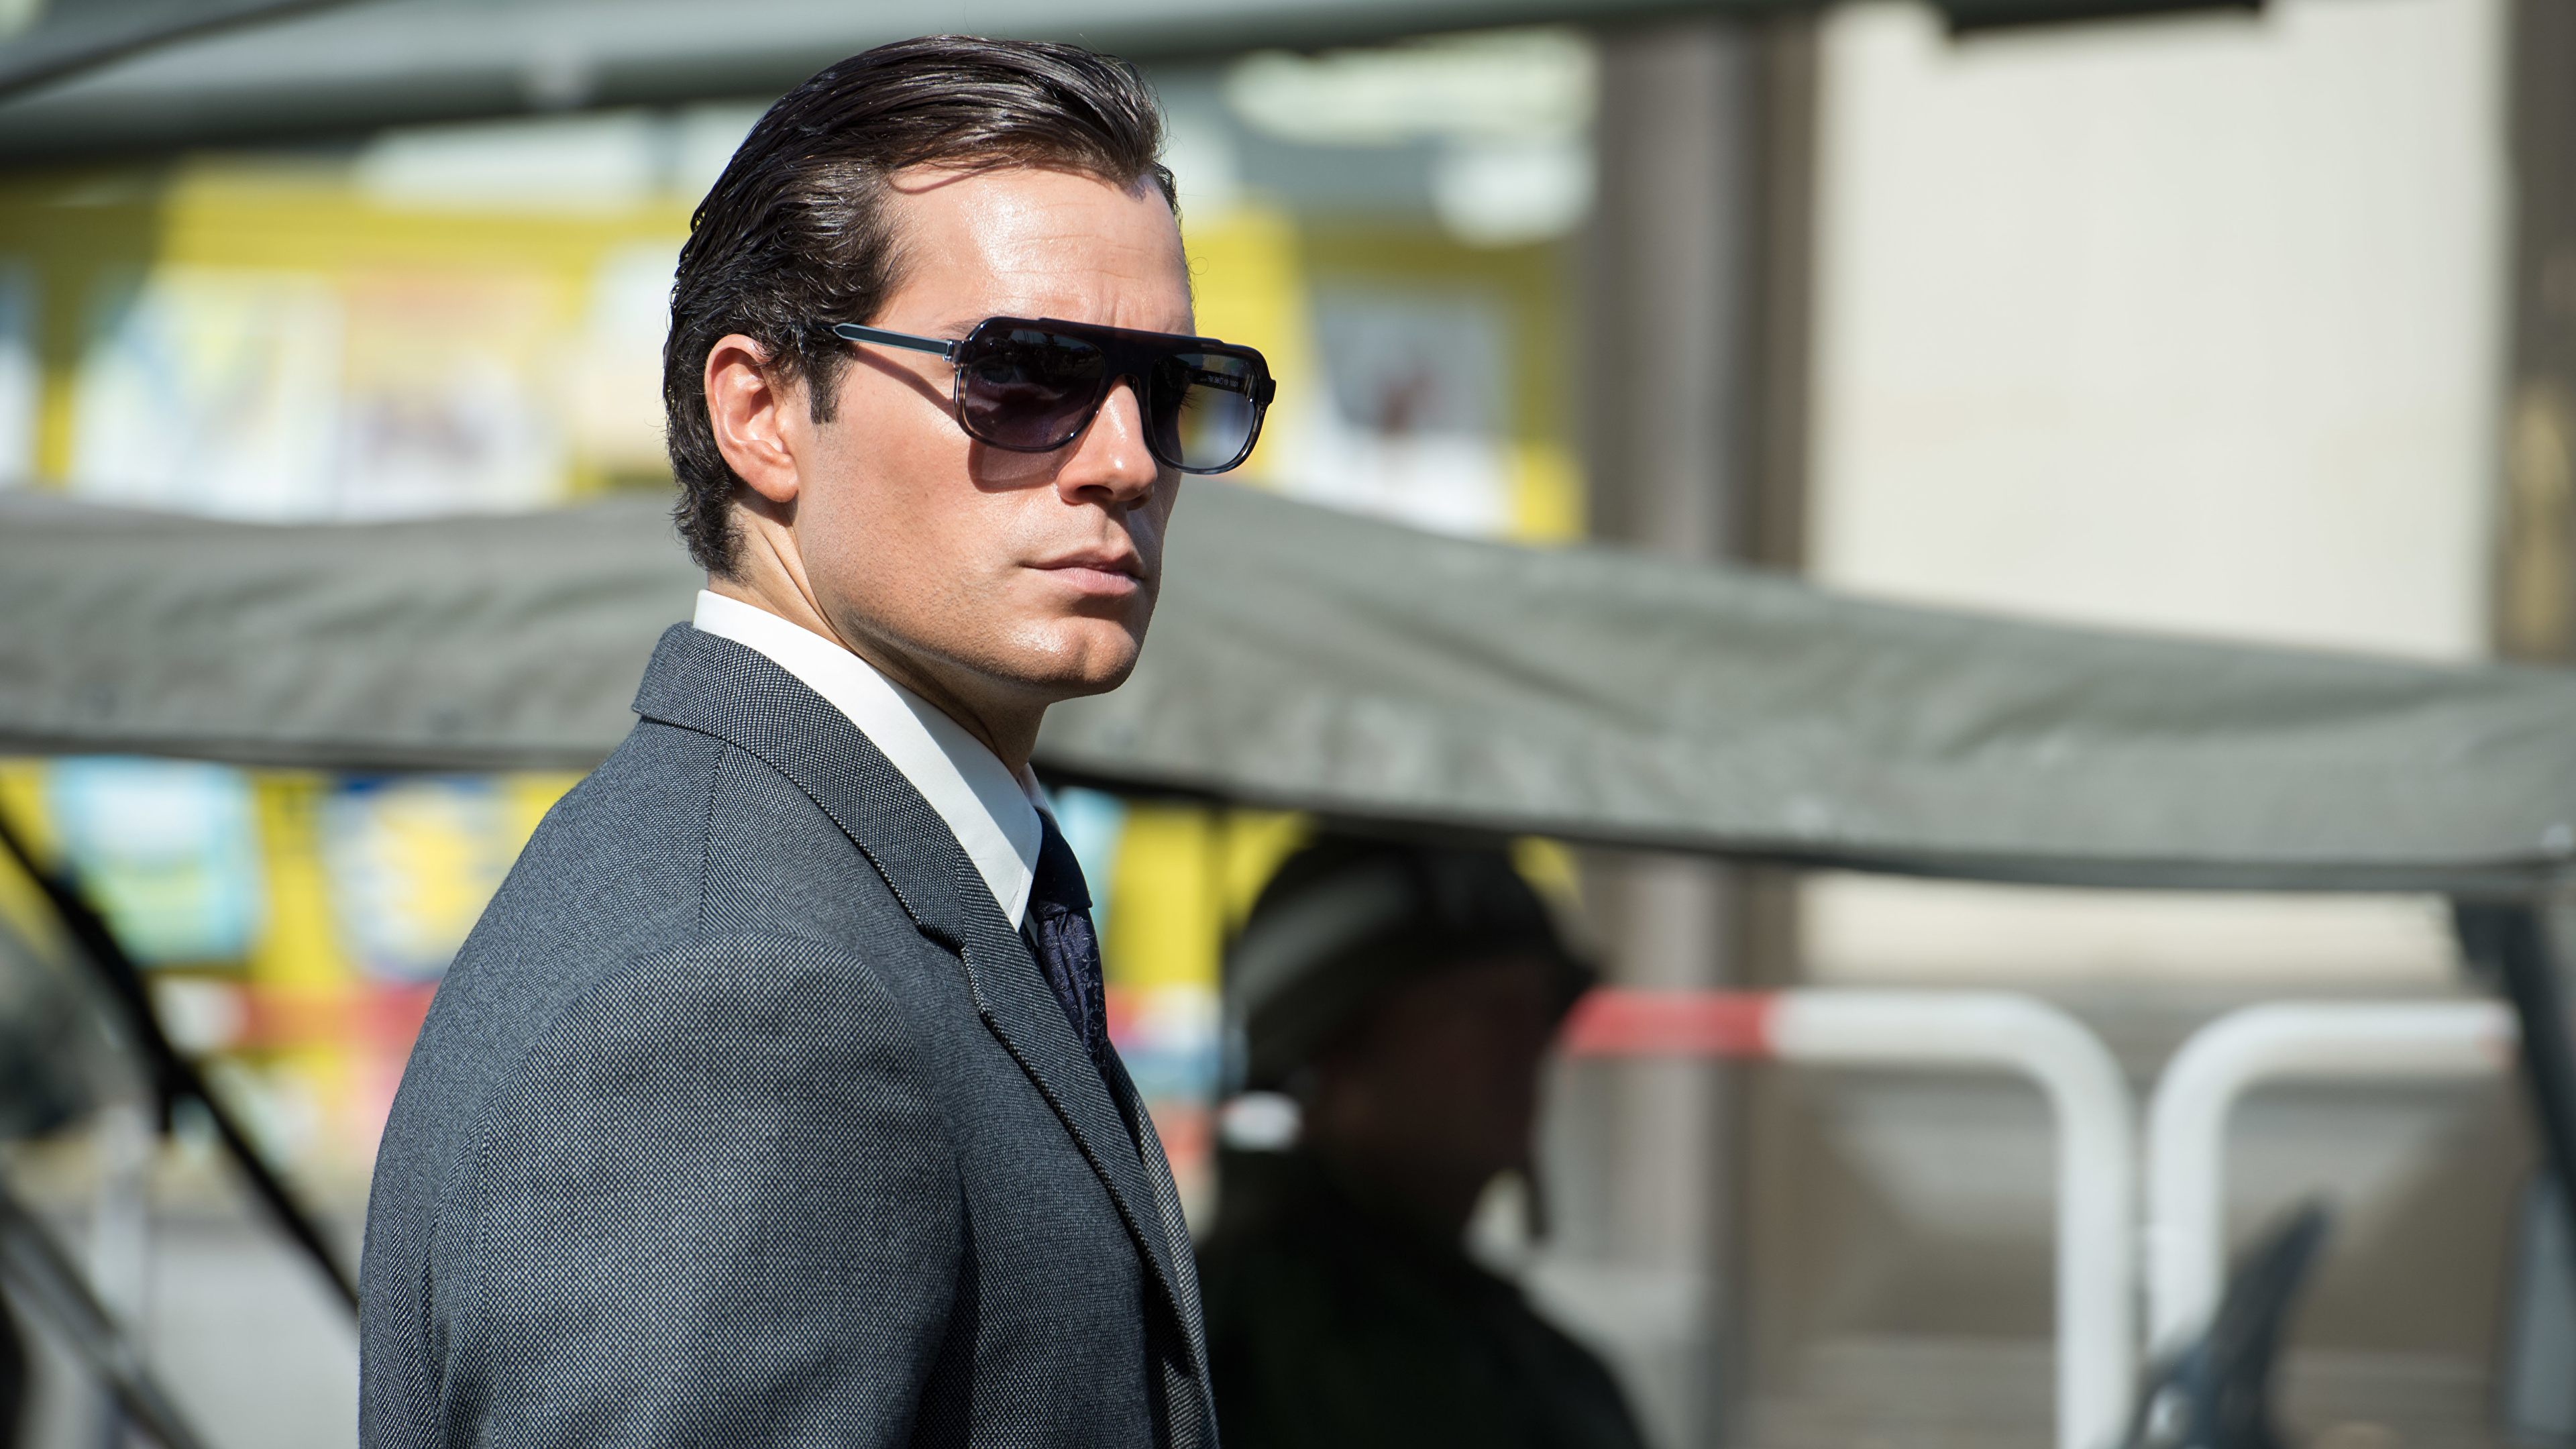 The Man From U N C L E